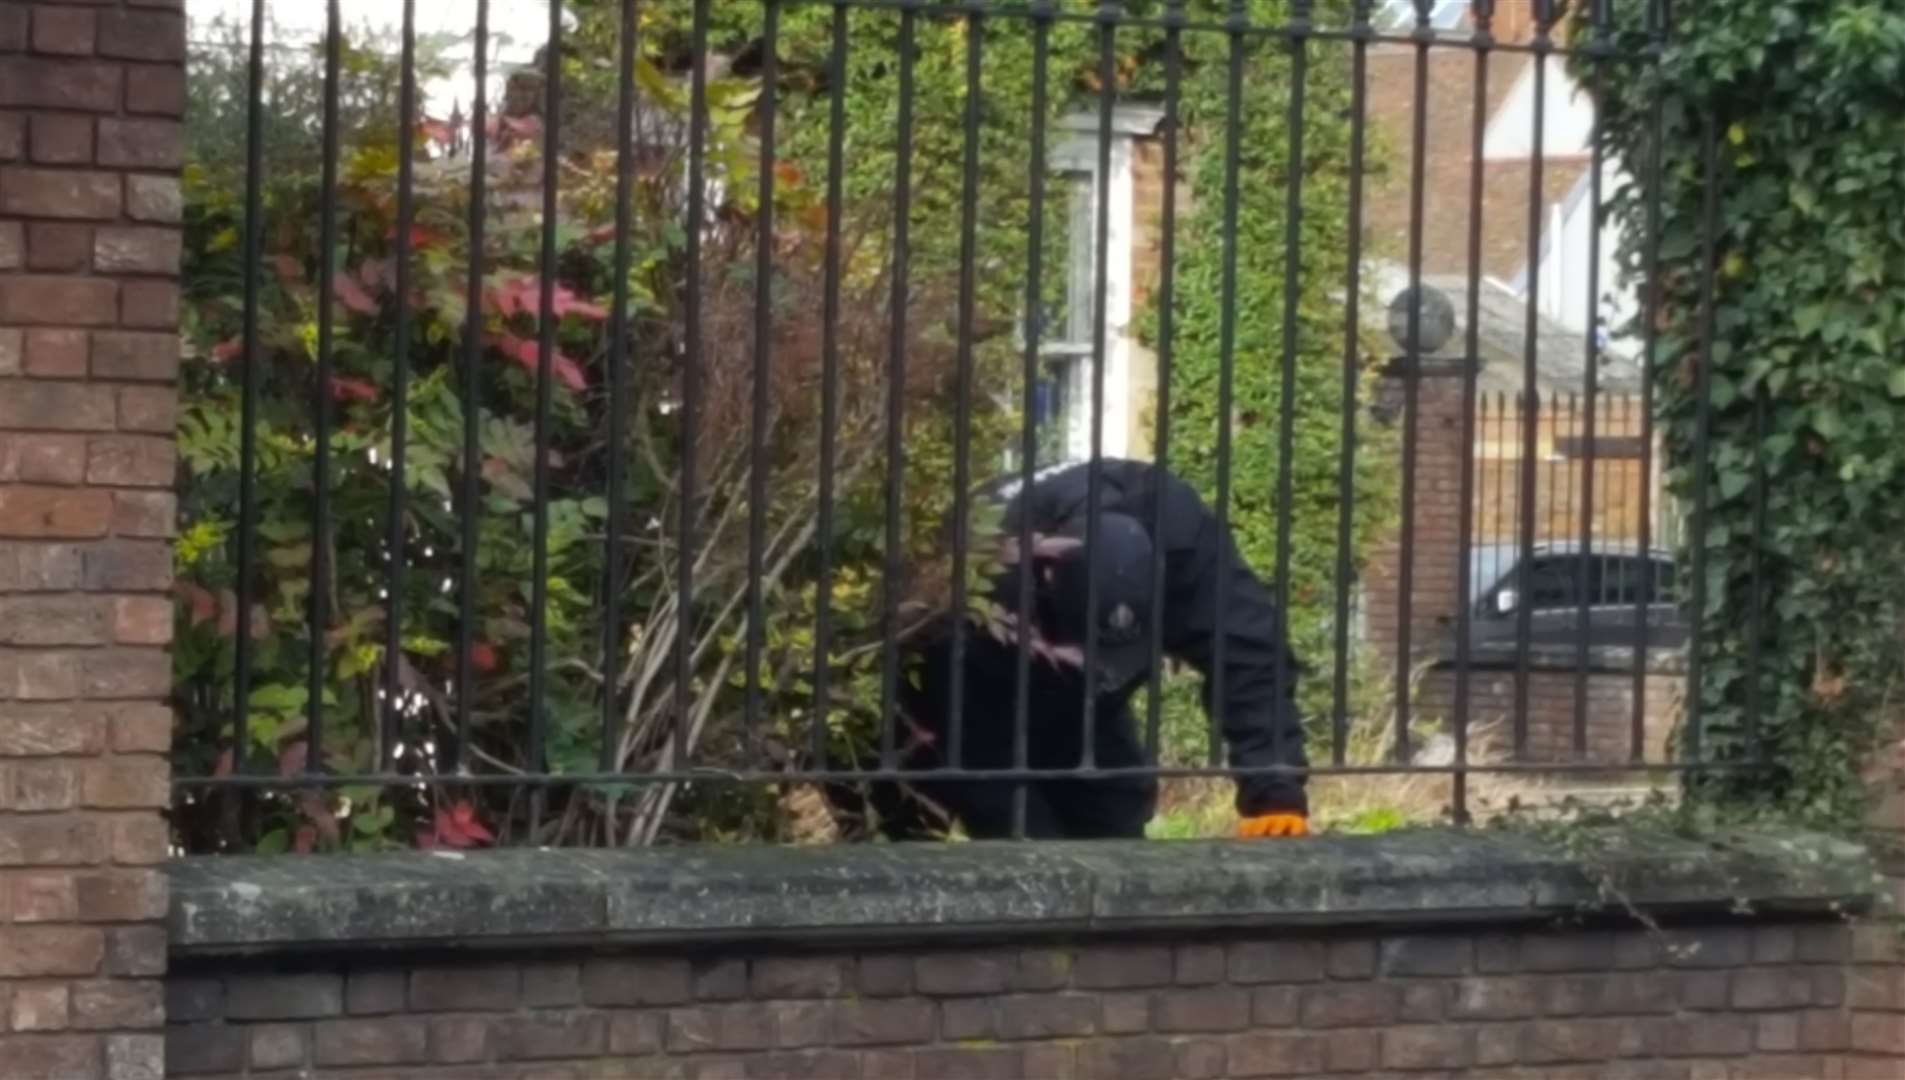 Officers in Knightrider Street looking for evidence after the alleged murder of Welsey Adyinka